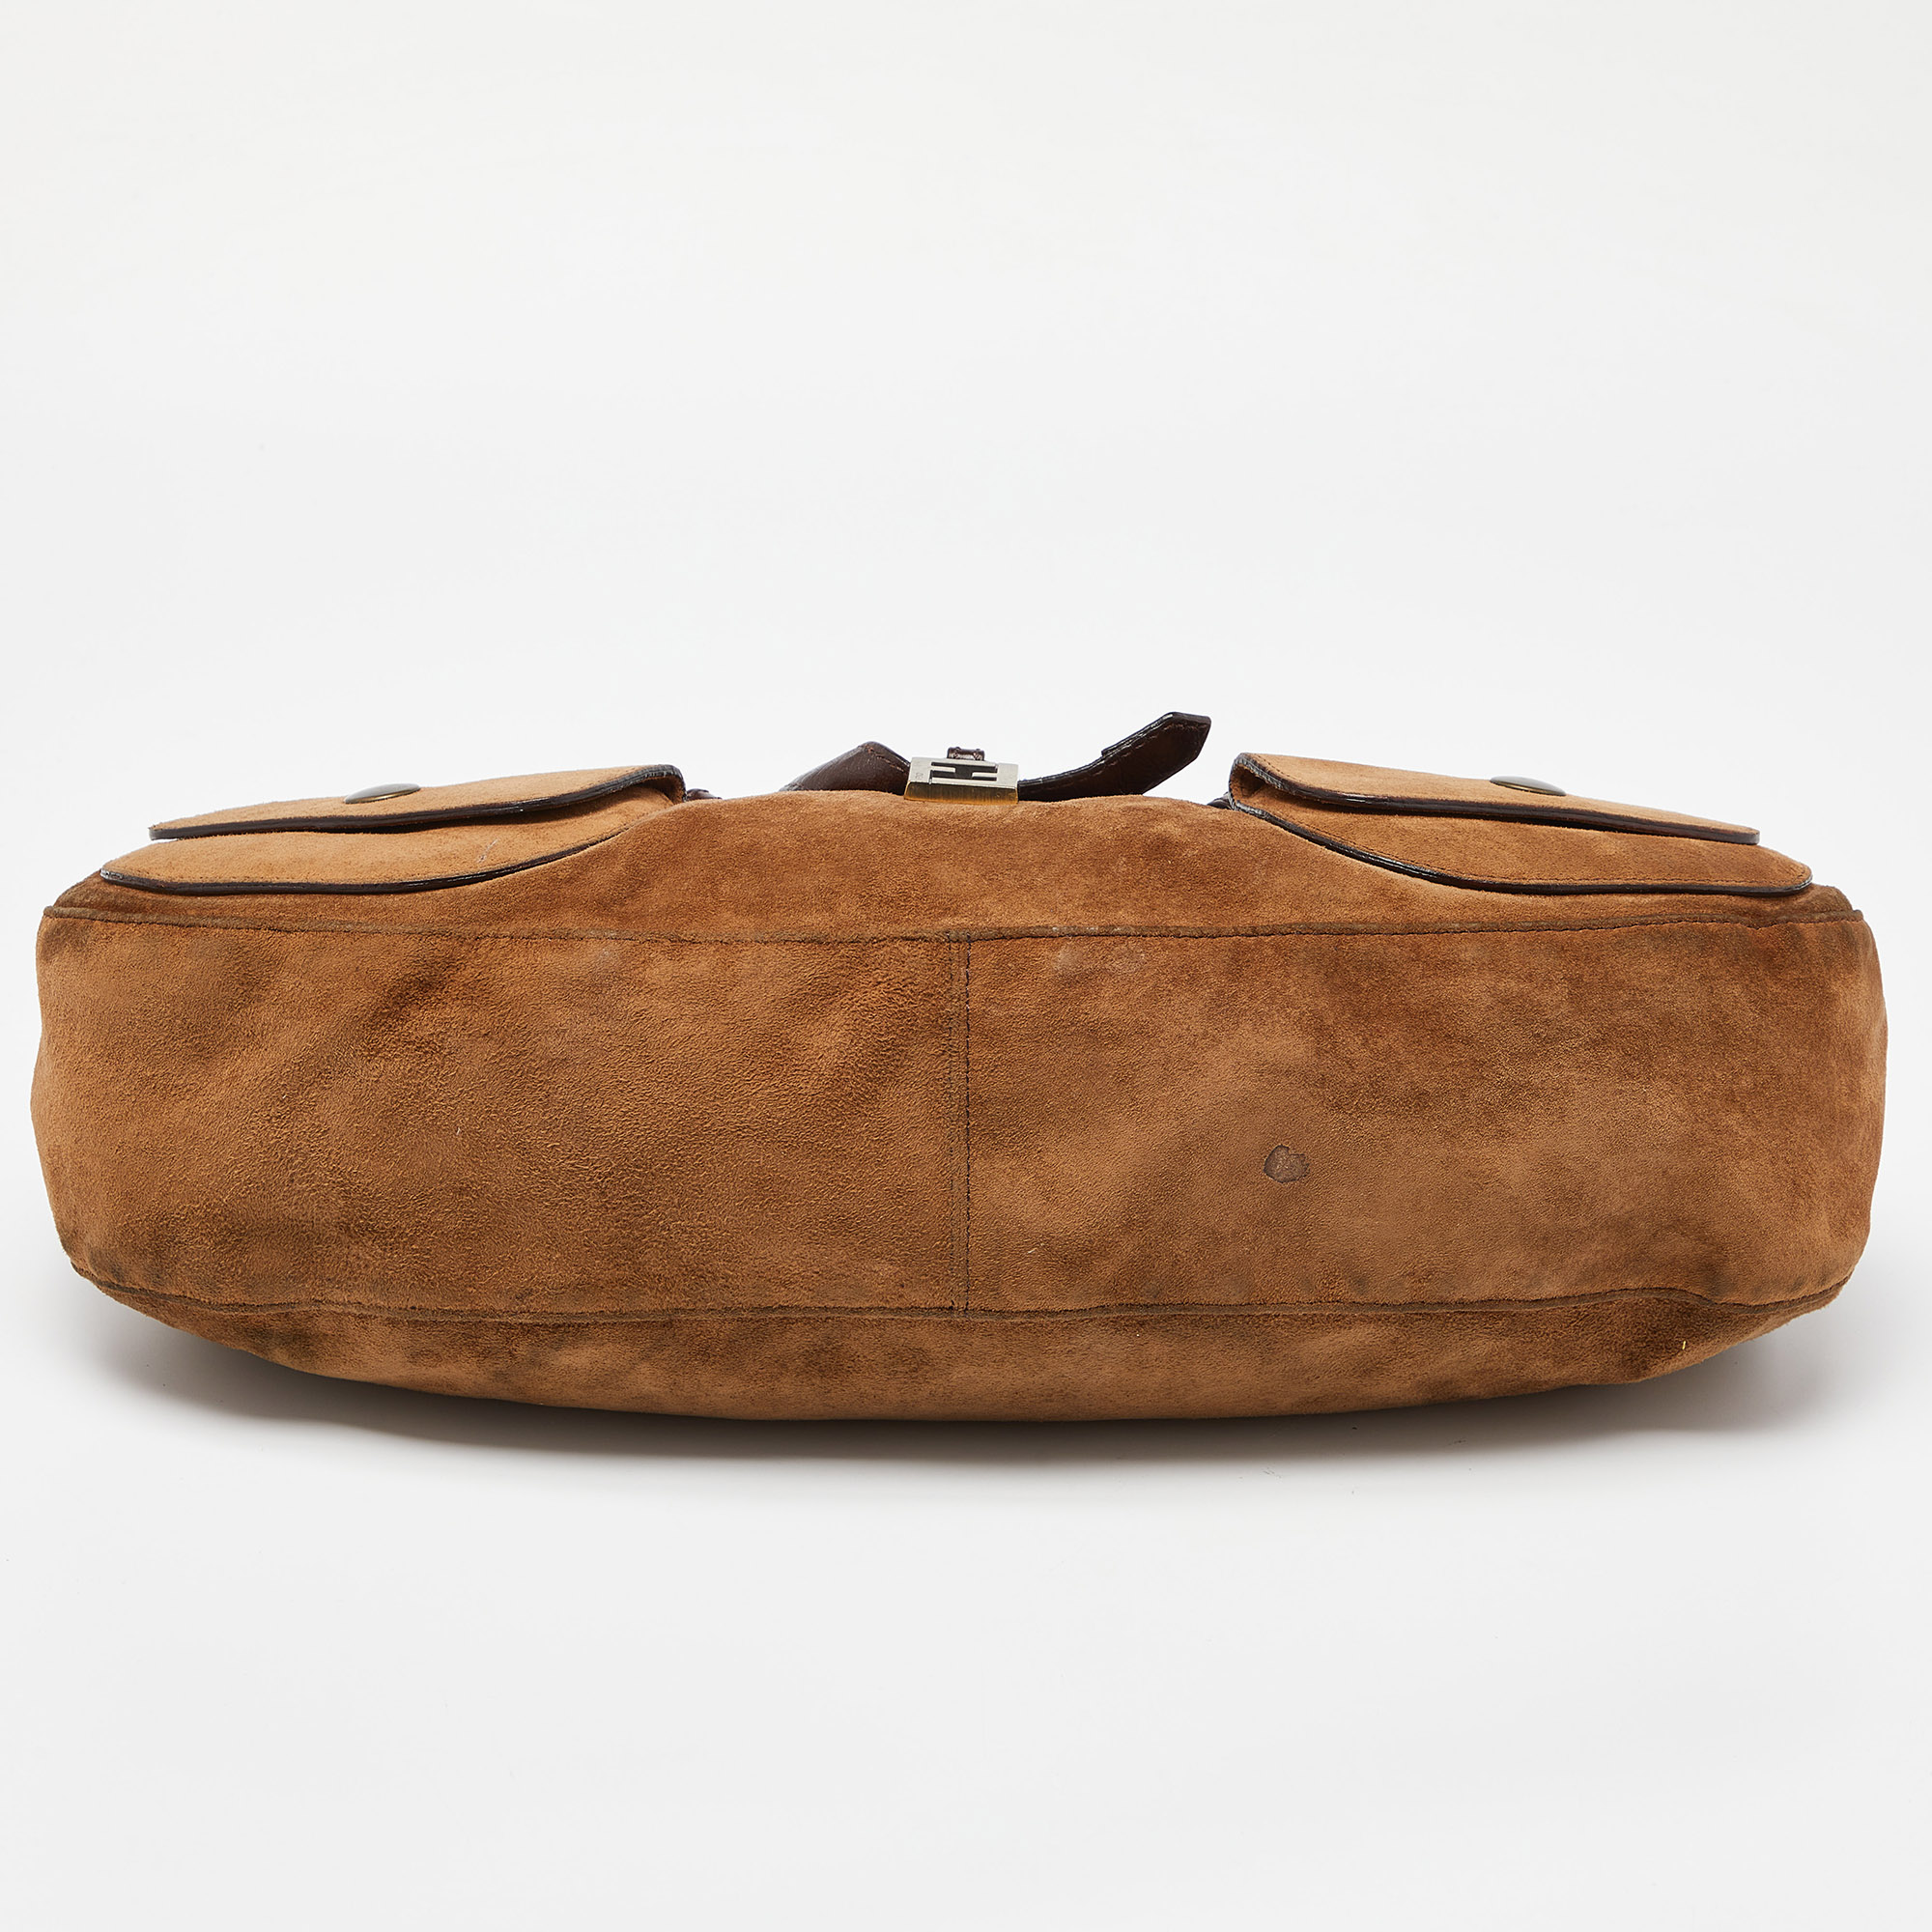 Fendi Brown Suede And Leather Front Pocket Hobo